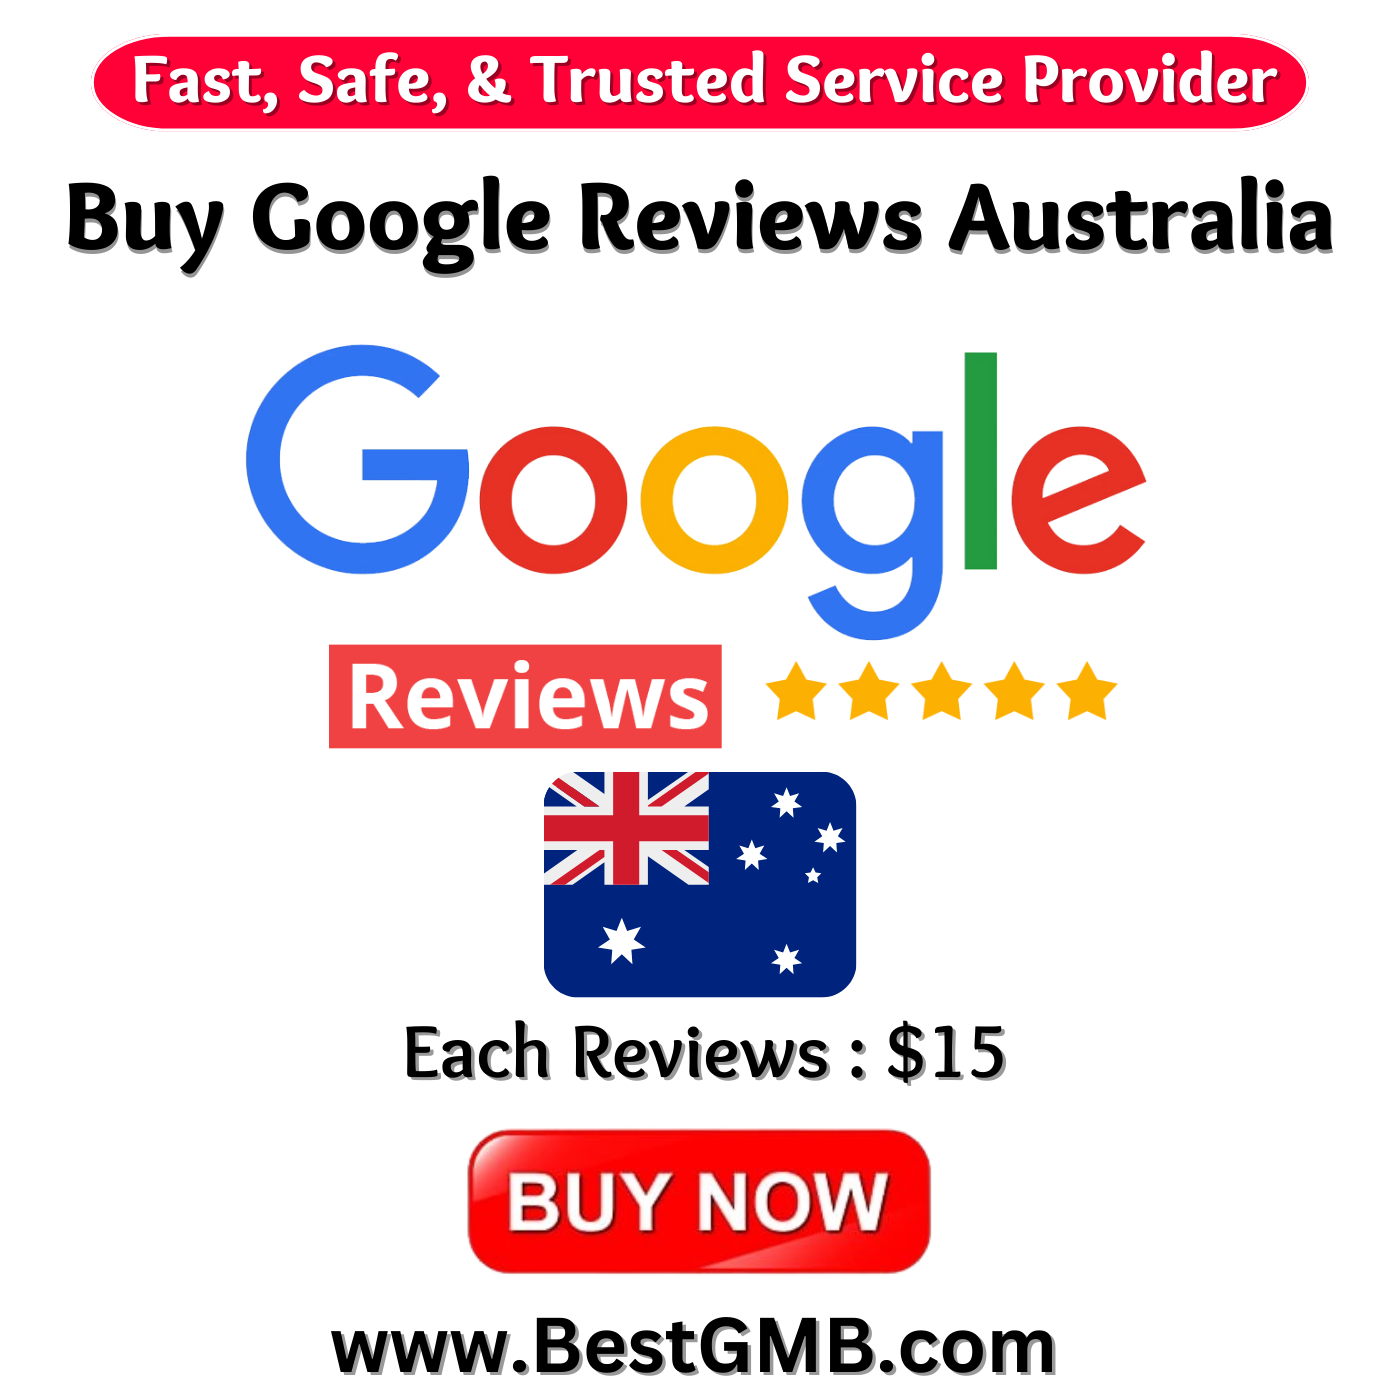 Buy Google Reviews Australia - Fast , Safe & Trusted